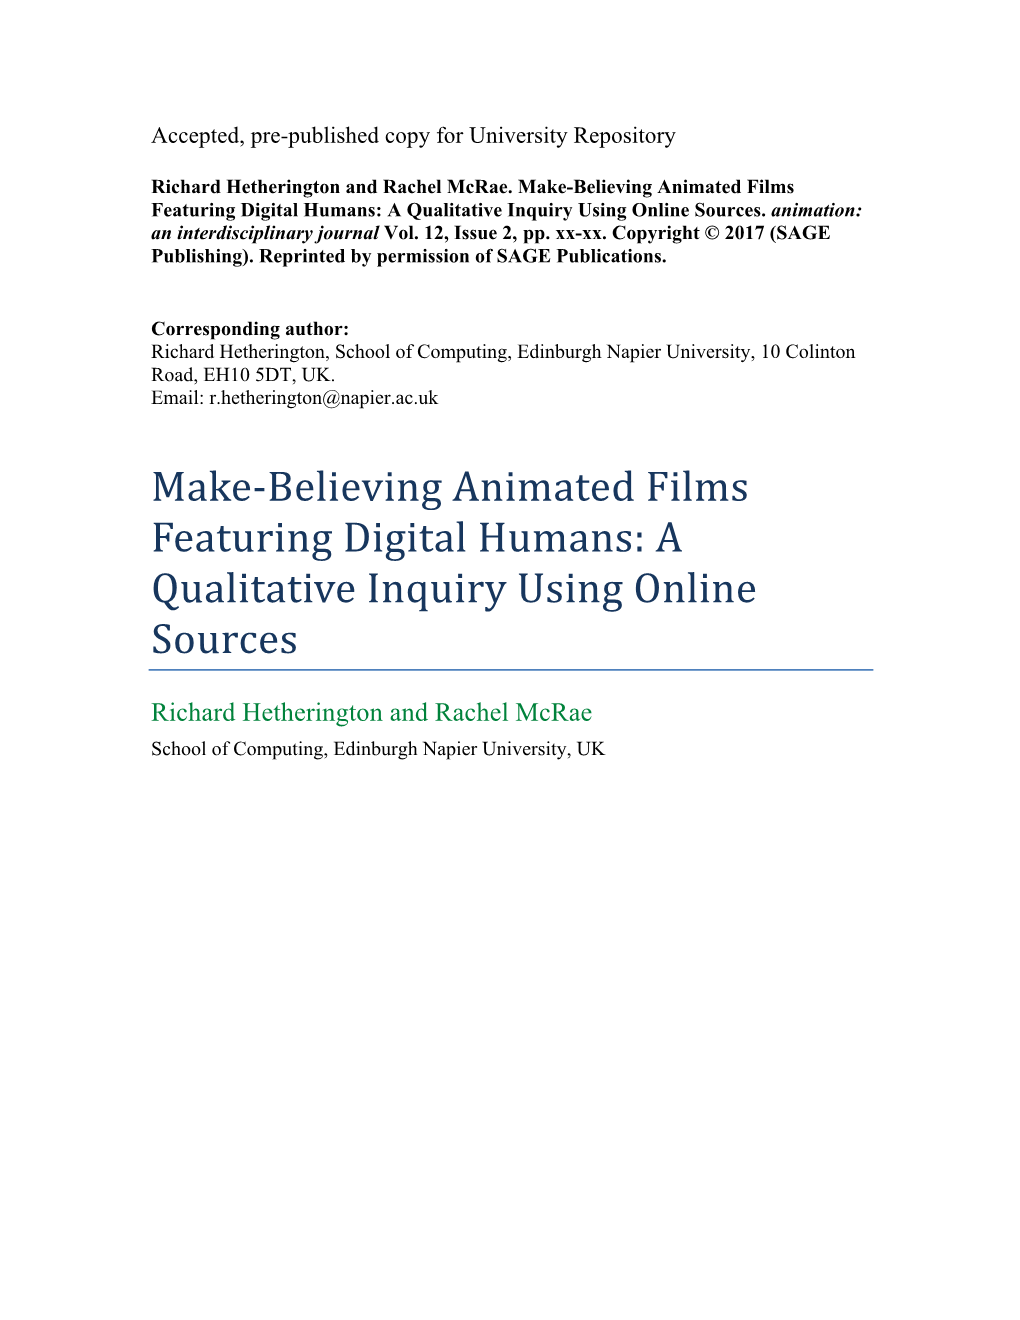 Believing Animated Films Featuring Digital Humans: a Qualitative Inquiry Using Online Sources